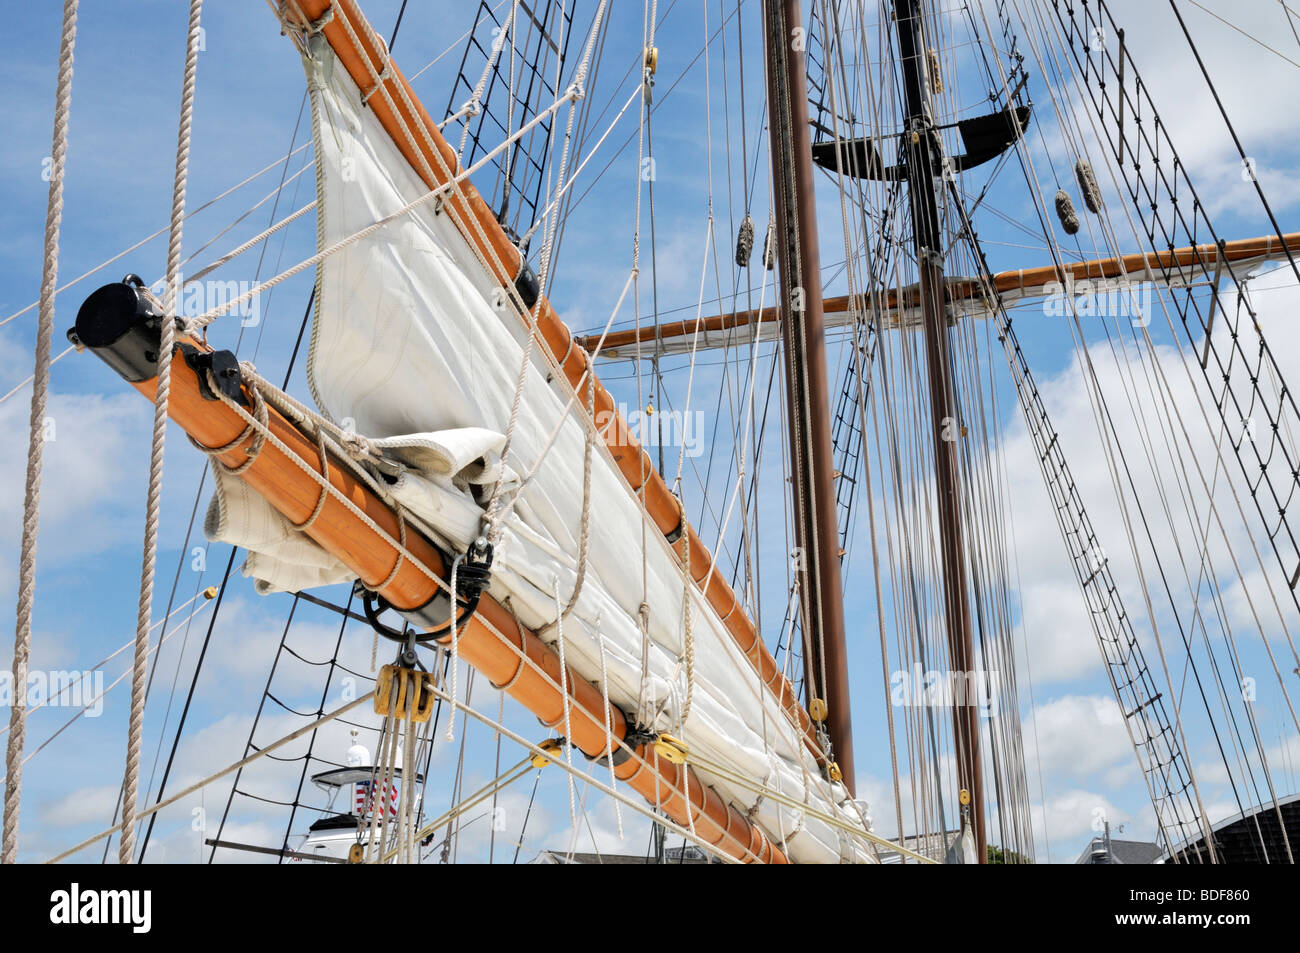 Sailing ship boom and gaff, gaff rigged, with furled sail and masts Stock Photo